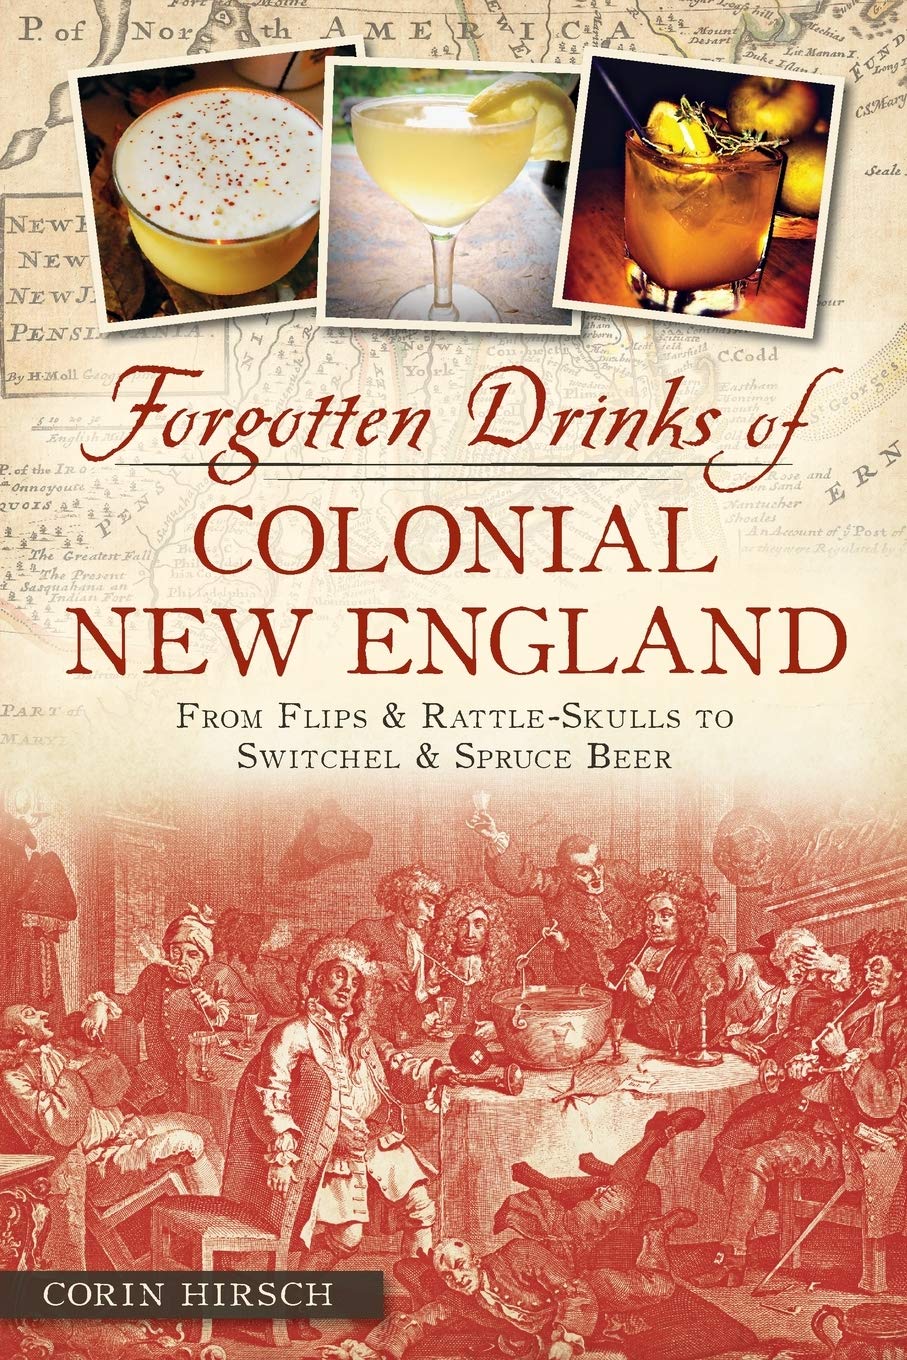 Forgotten Drinks of Colonial New England: From Flips & Rattle-Skulls to Switchel & Spruce Beer (Corin Hirsch)